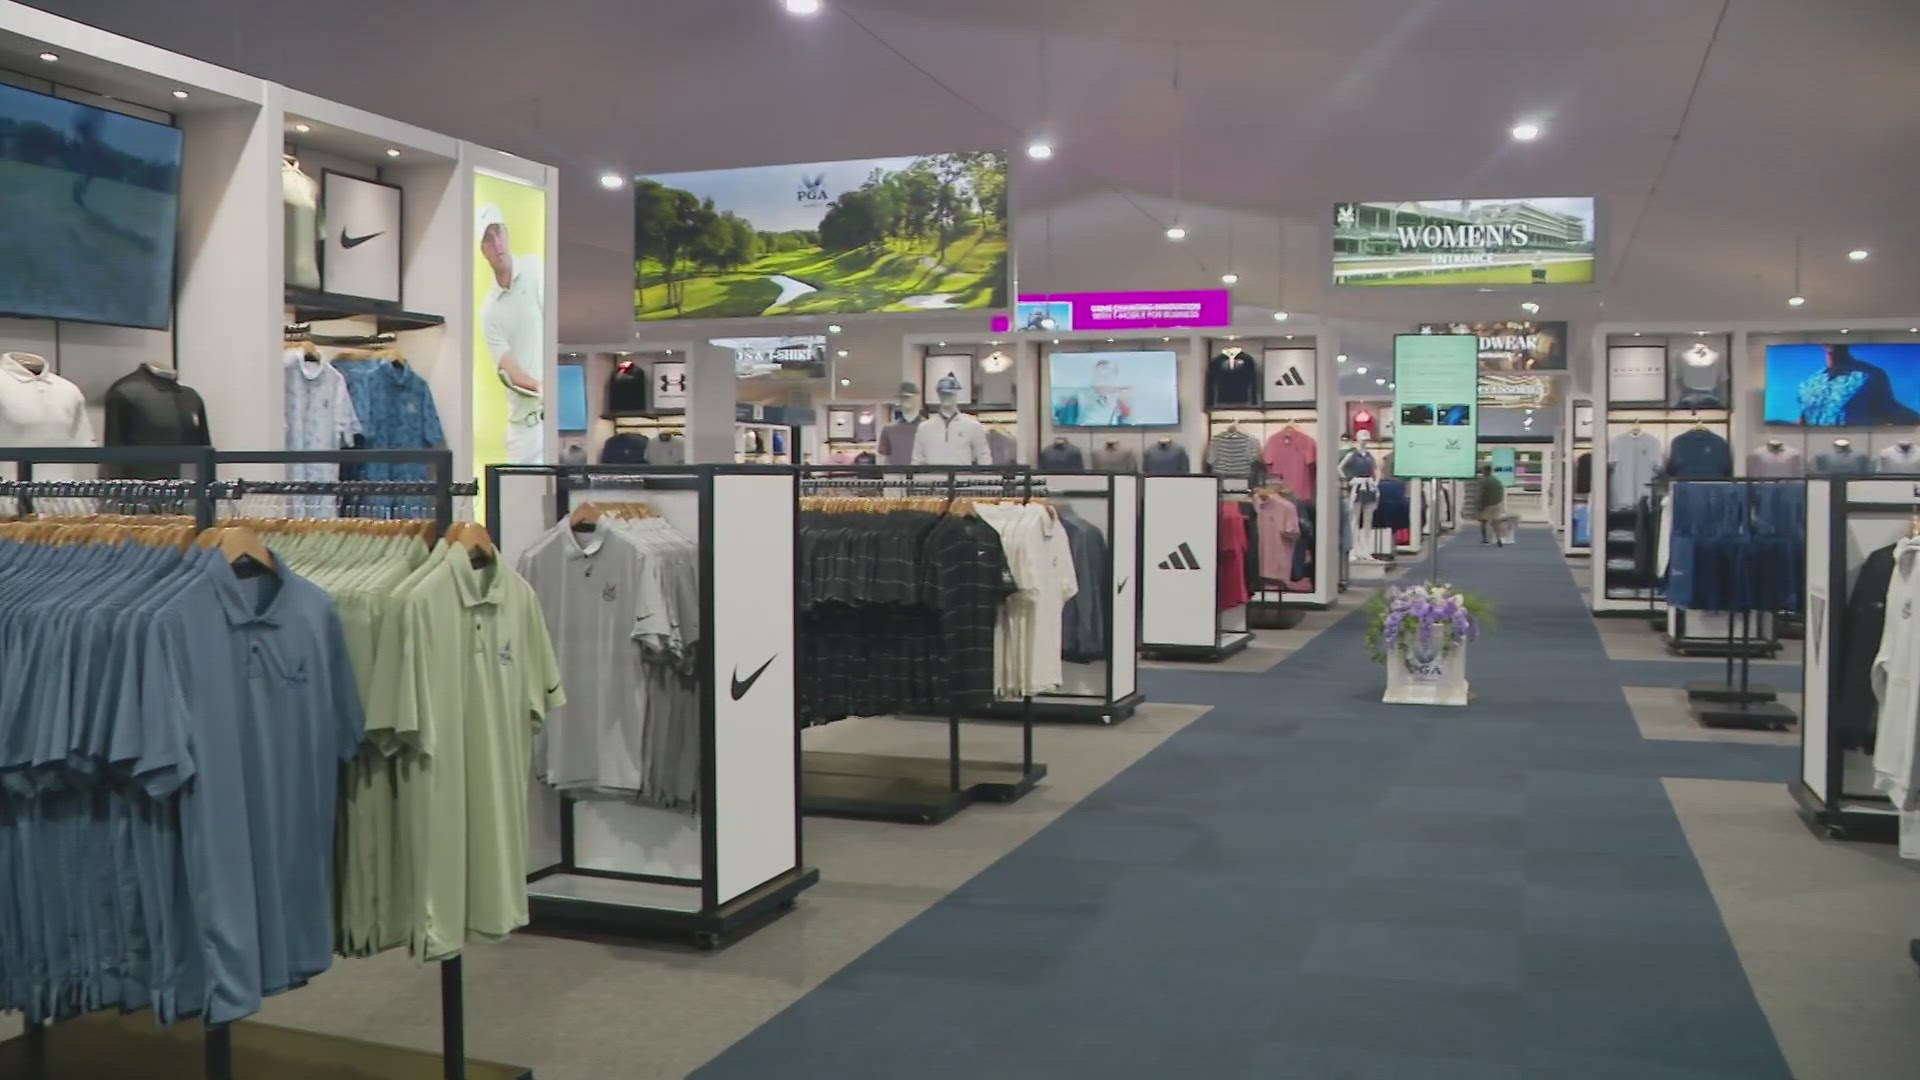 You will find 45 different brands at the PGA shops.